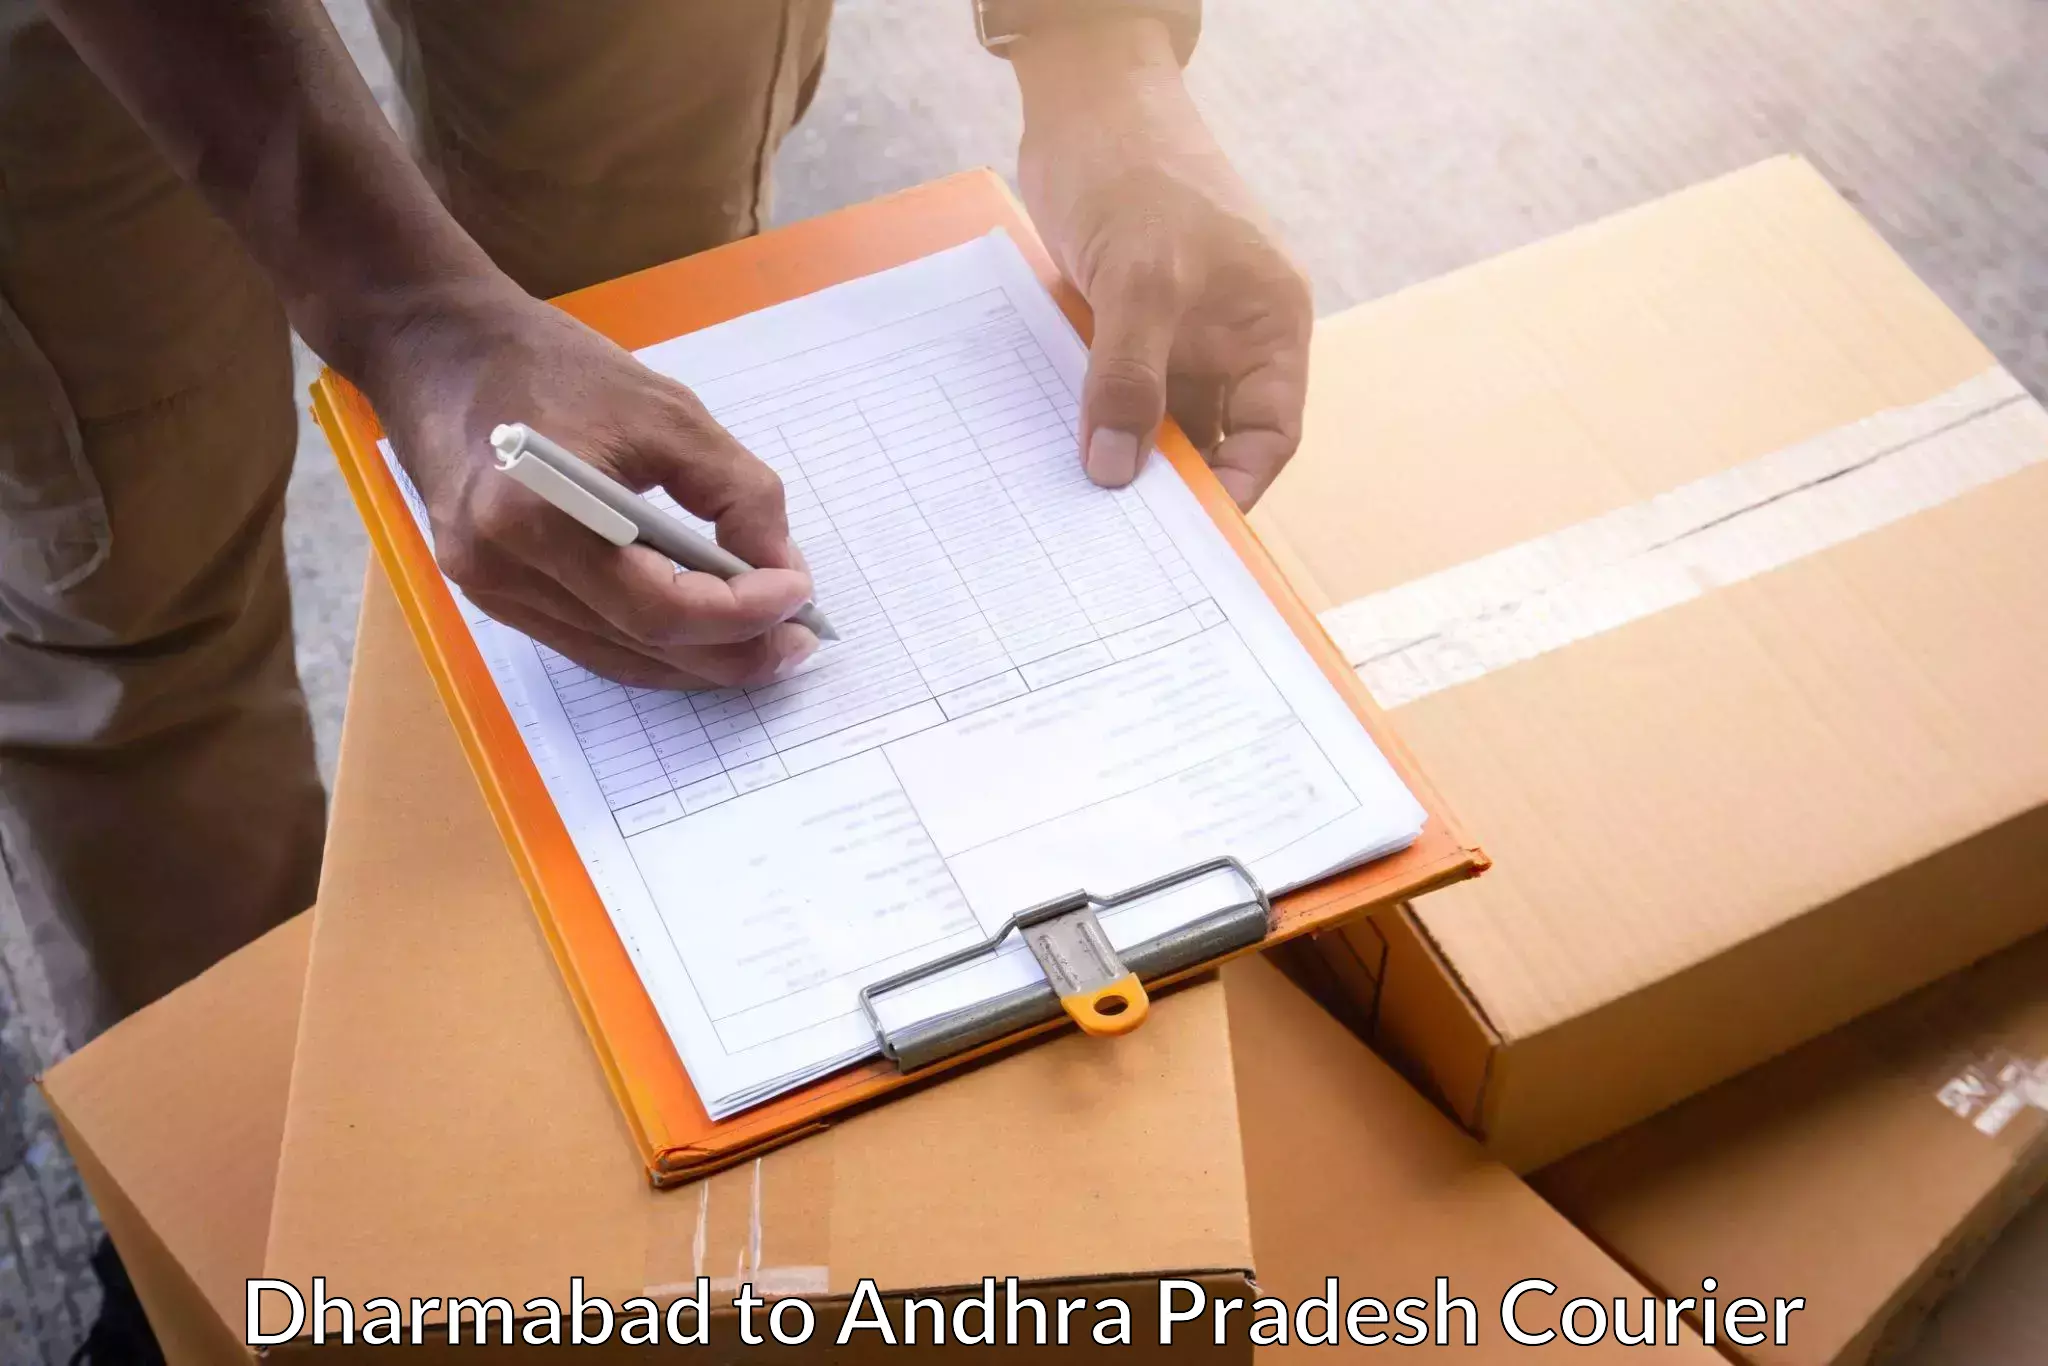 E-commerce logistics support Dharmabad to Visakhapatnam Port